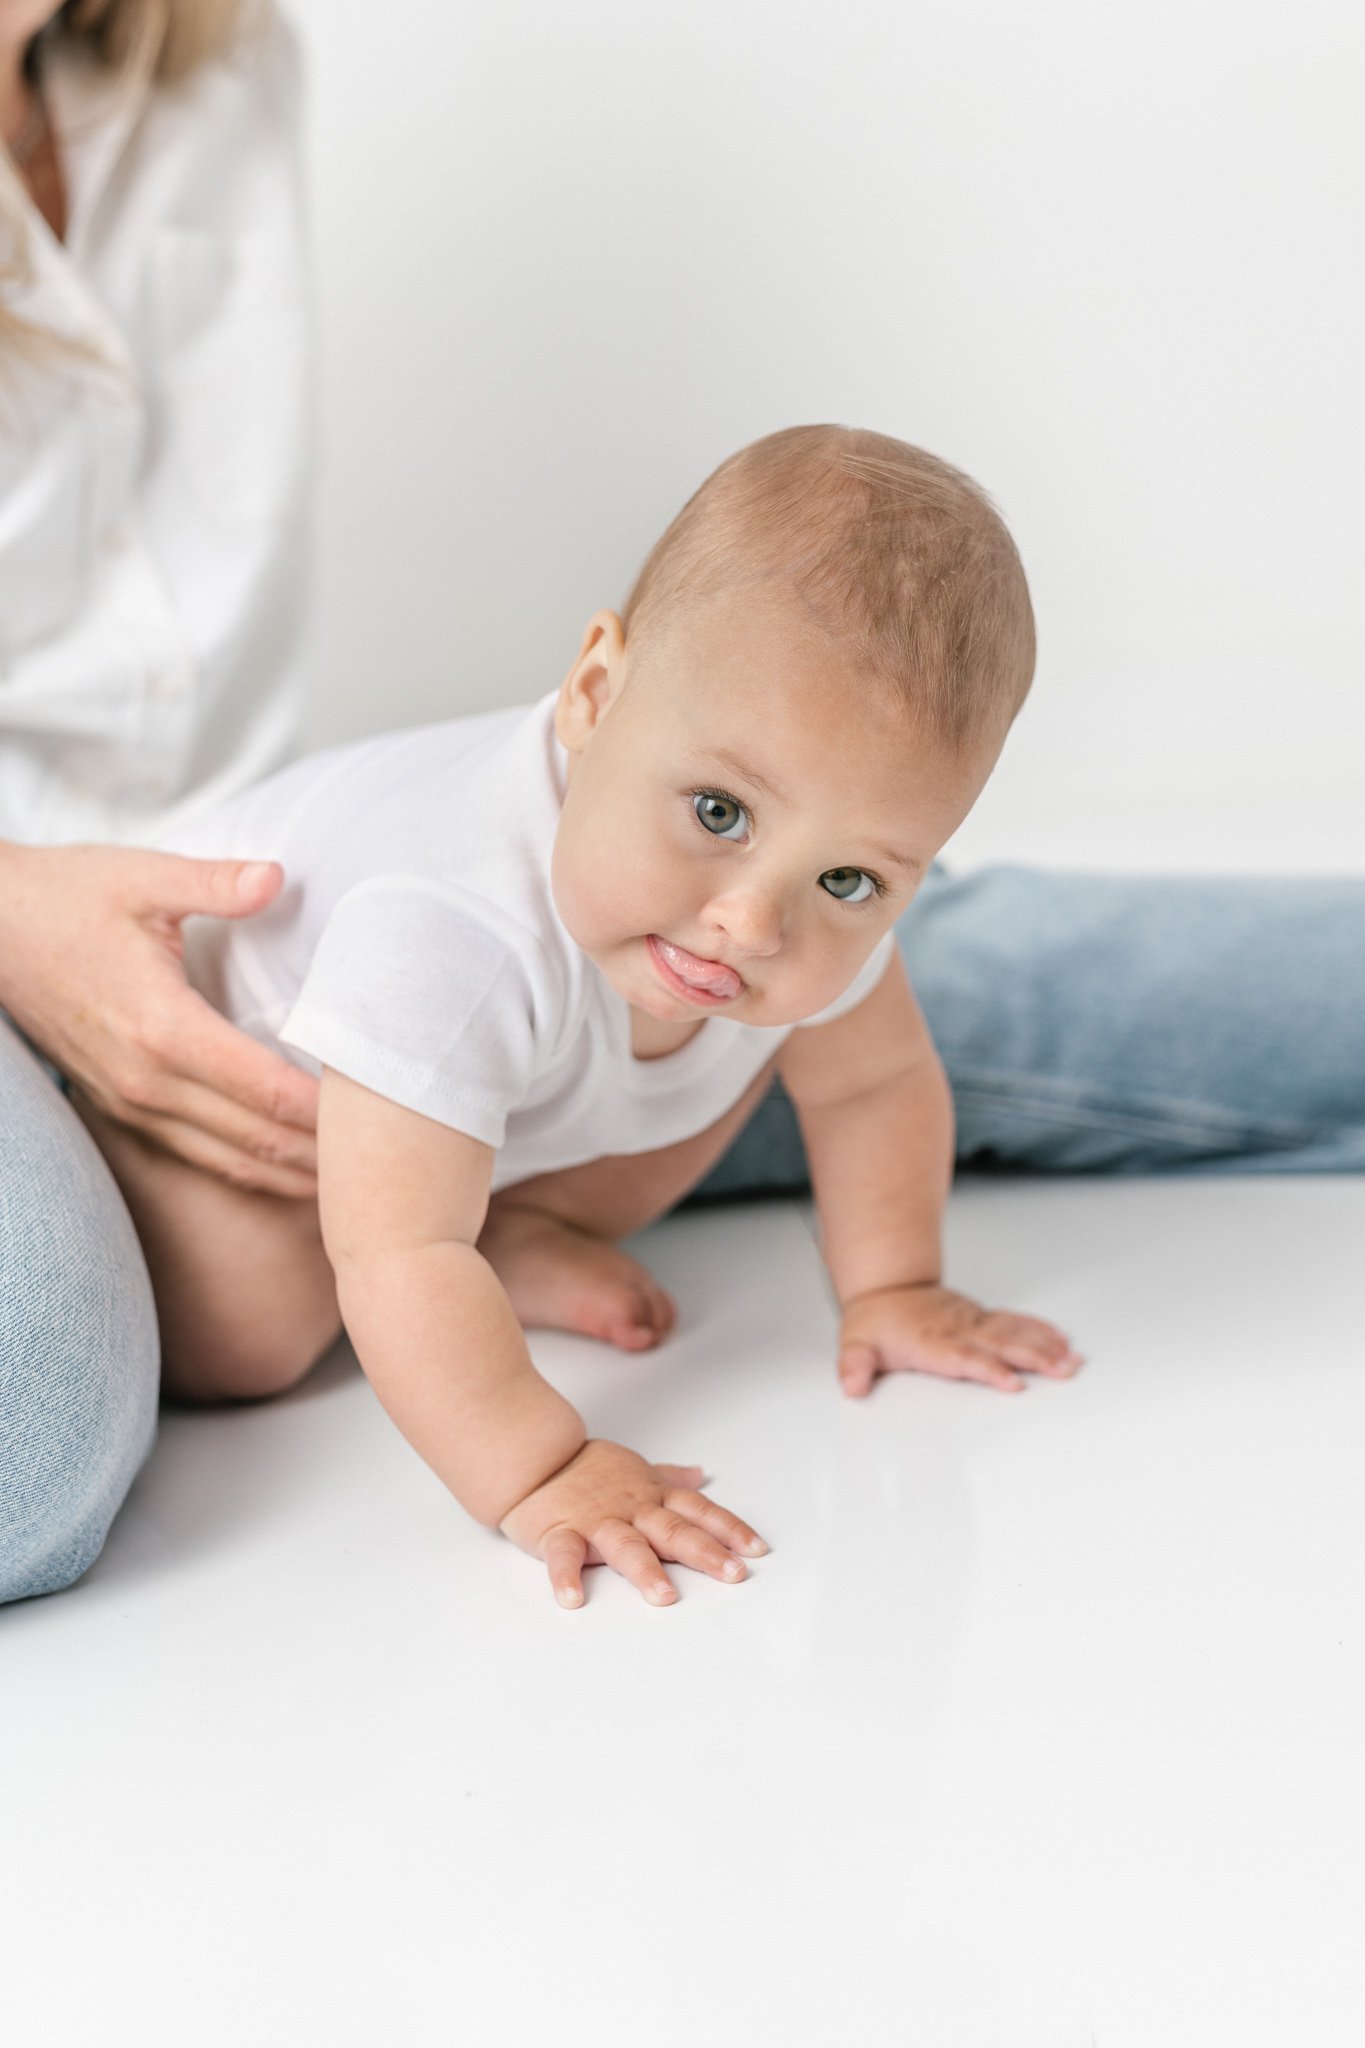  Baby portraits by Nicole Hawkins Photography capture a baby with her tongue out while she learns to crawl. baby with chunky hands learning to crawl #NicoleHawkinsPhotography #NicoleHawkinsNewborns #studionewborns #studioportraits #babystudioportrait